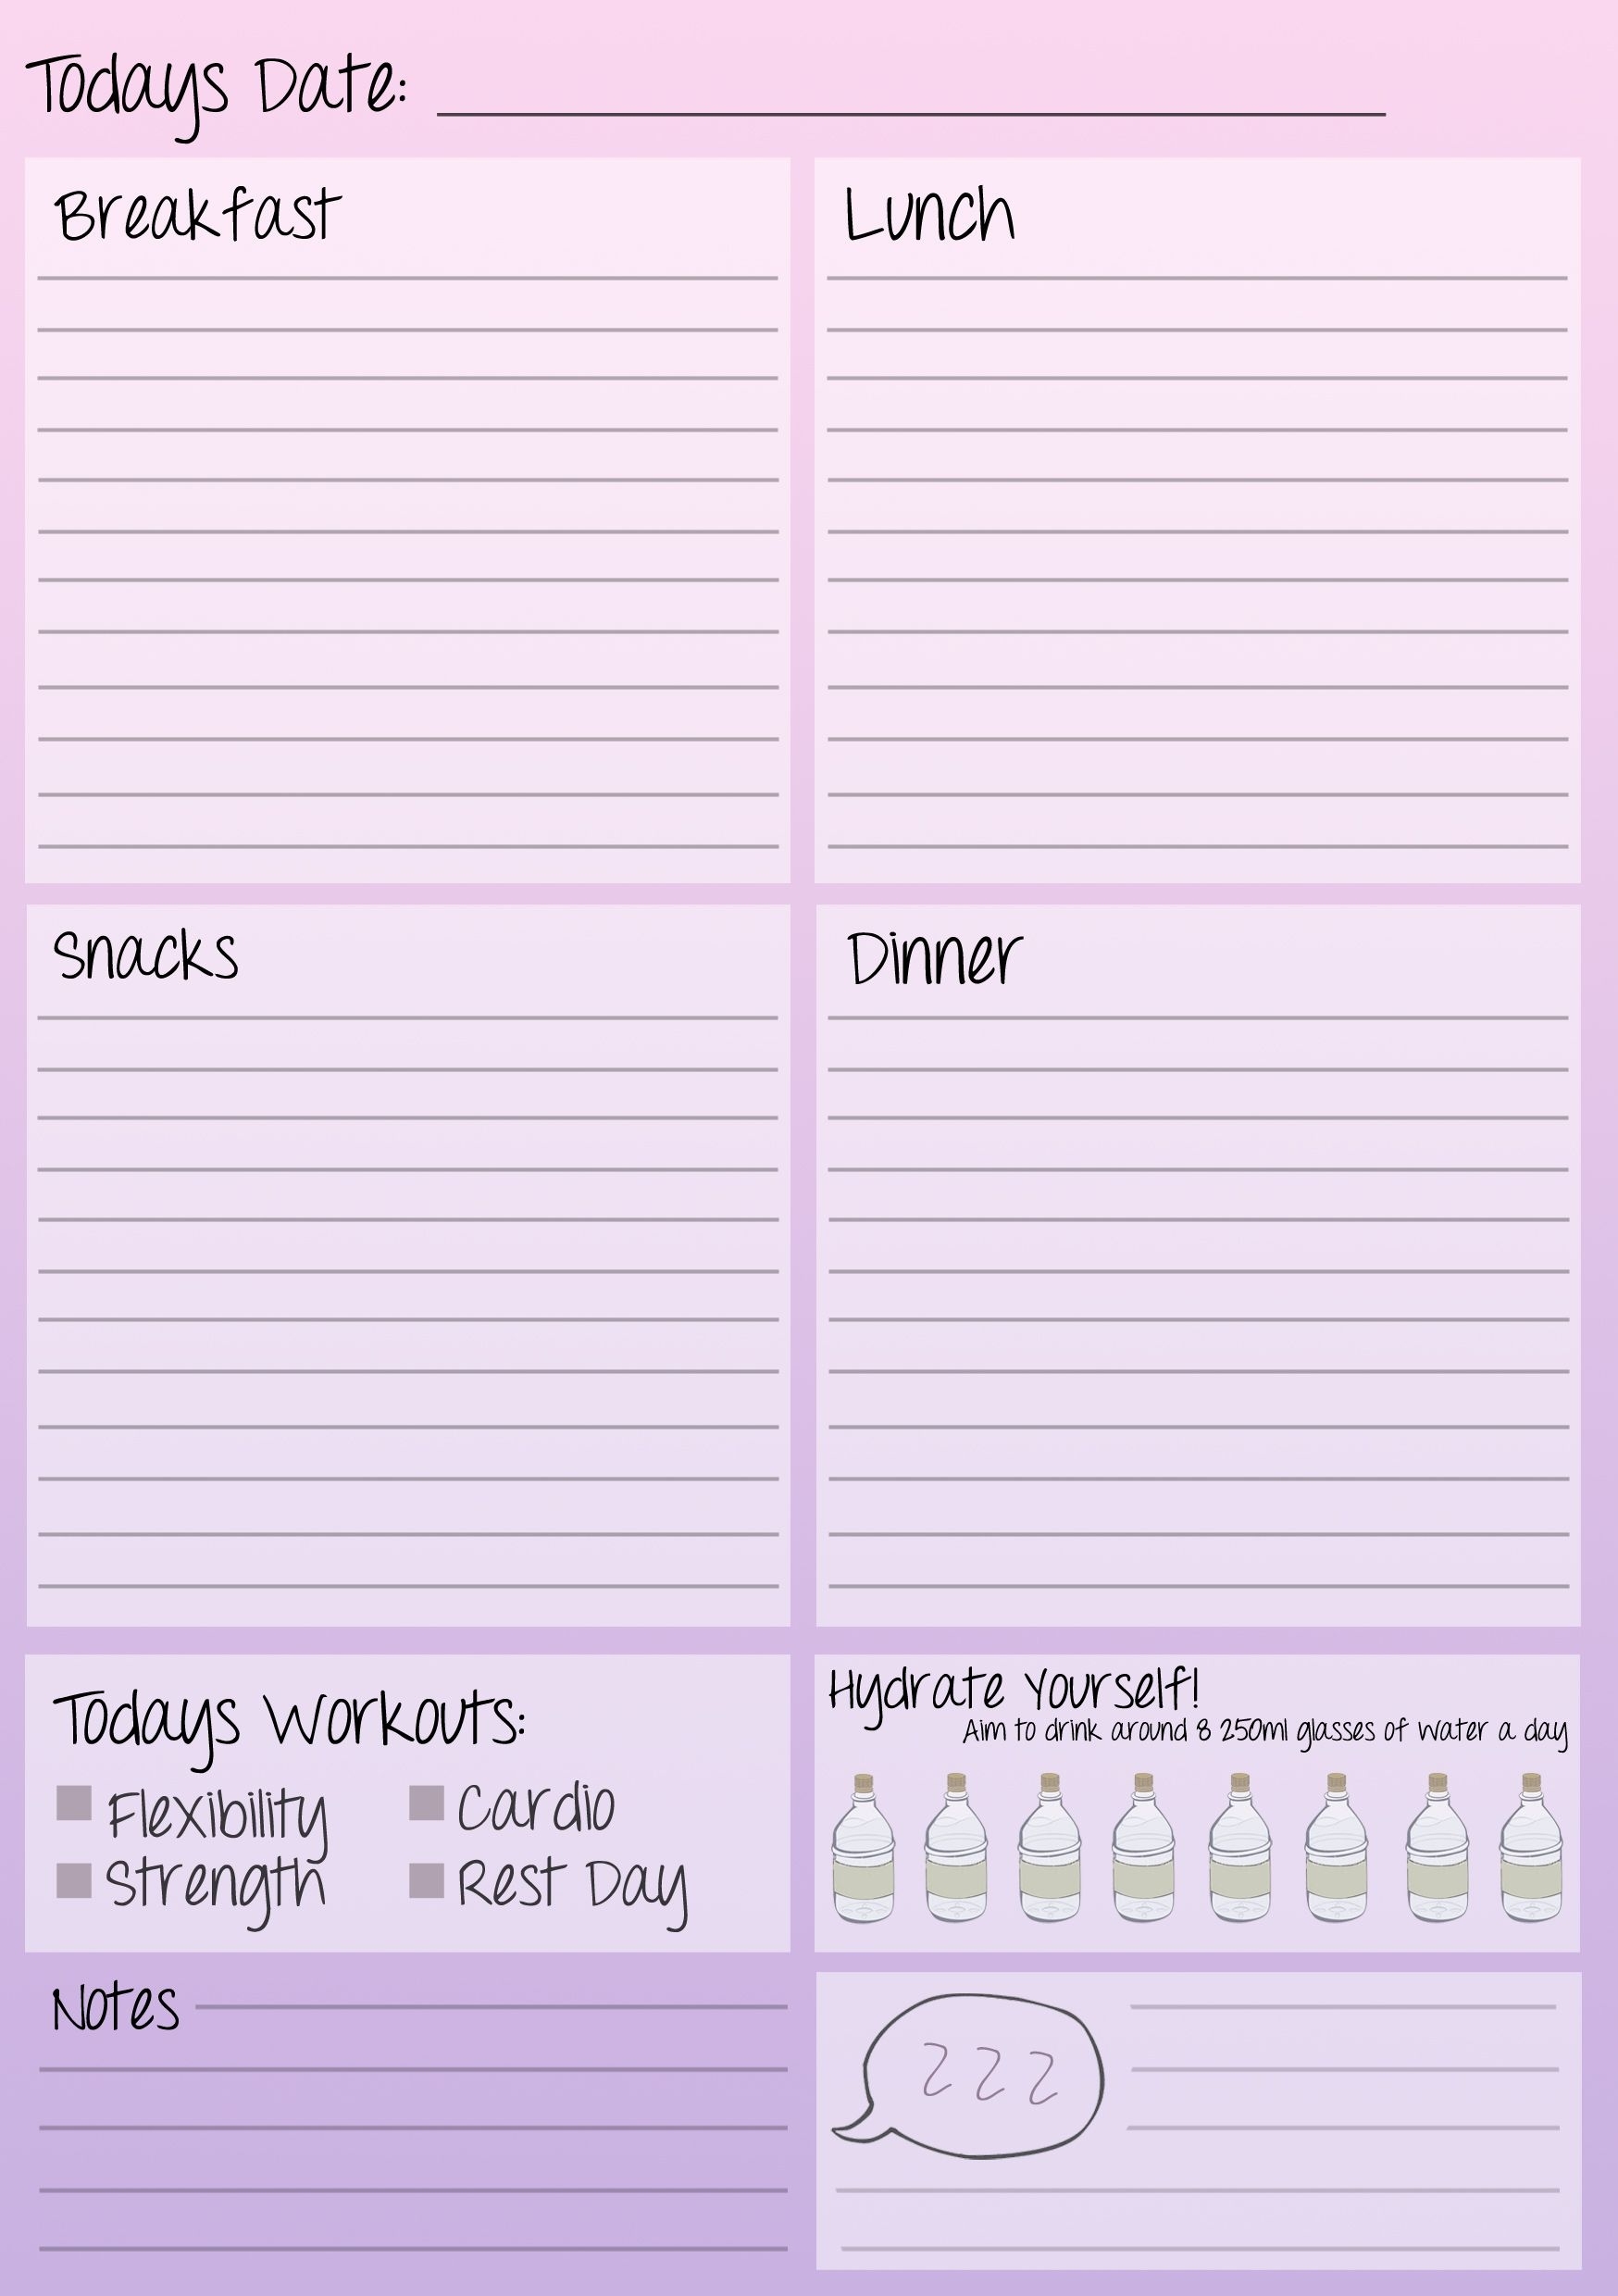 Daily Fitness Journal. Free Printable. | Fitness Journal